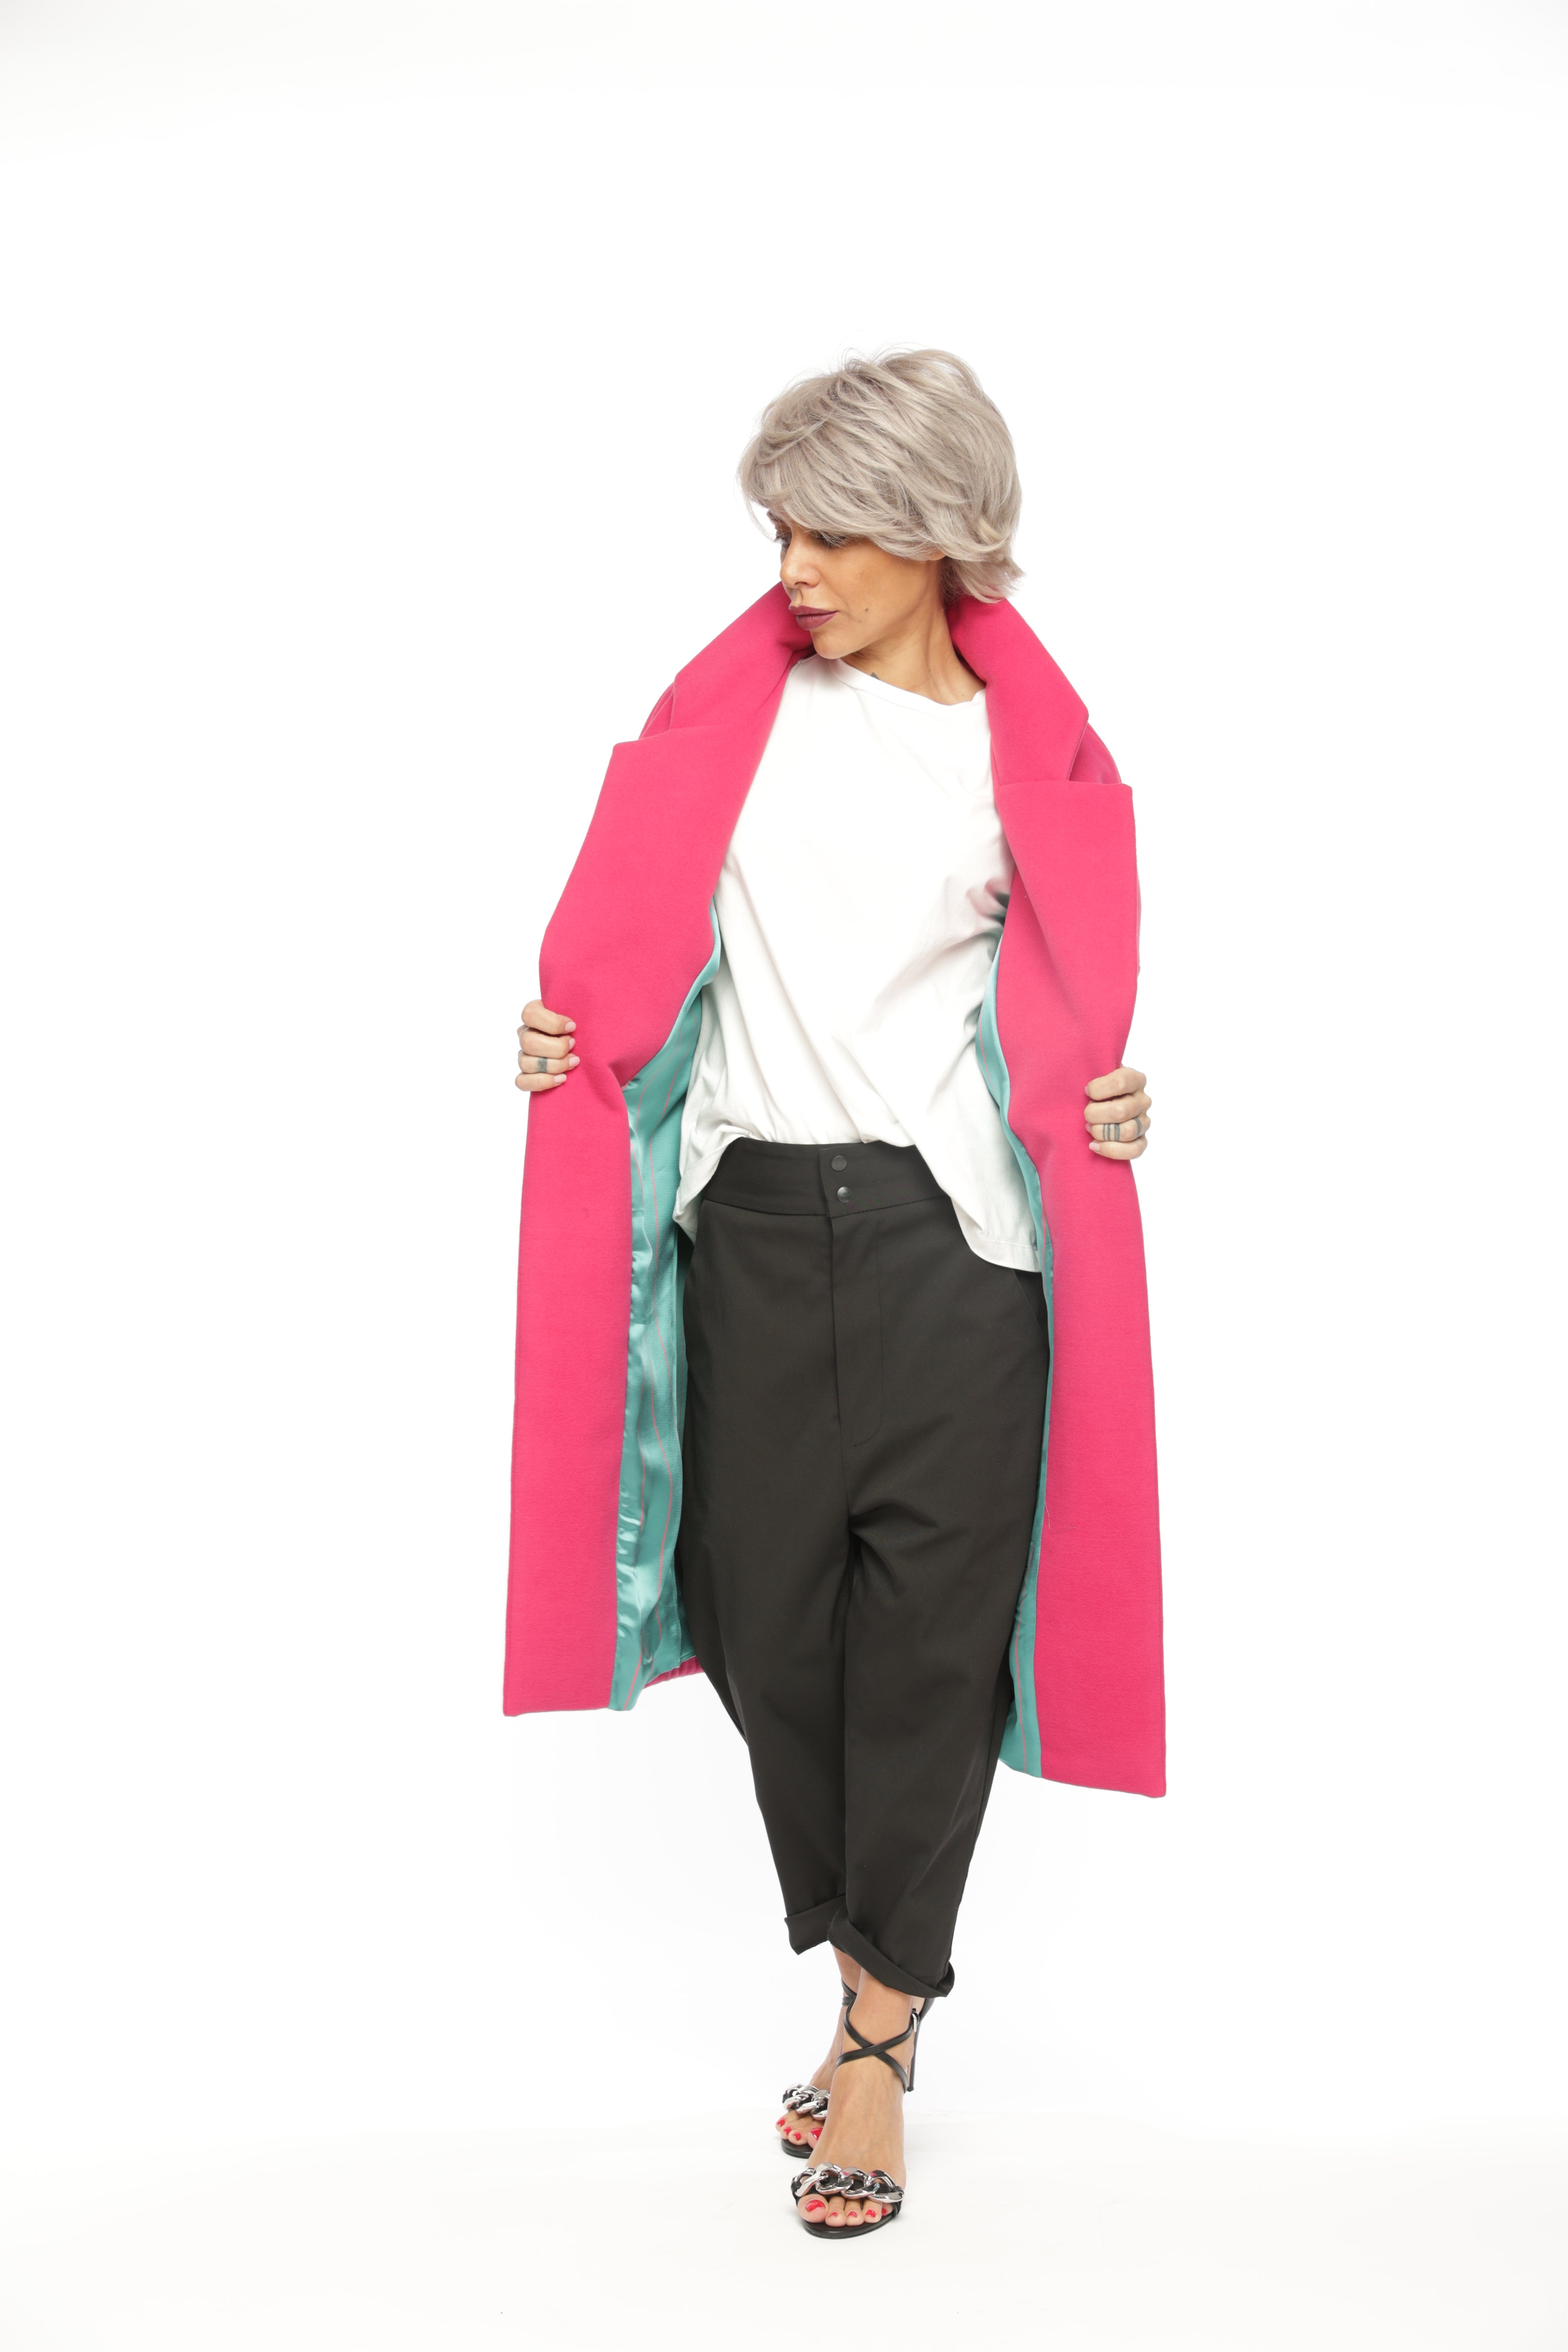 Relaxed Pink Color Blocking Coat with Teal Lining